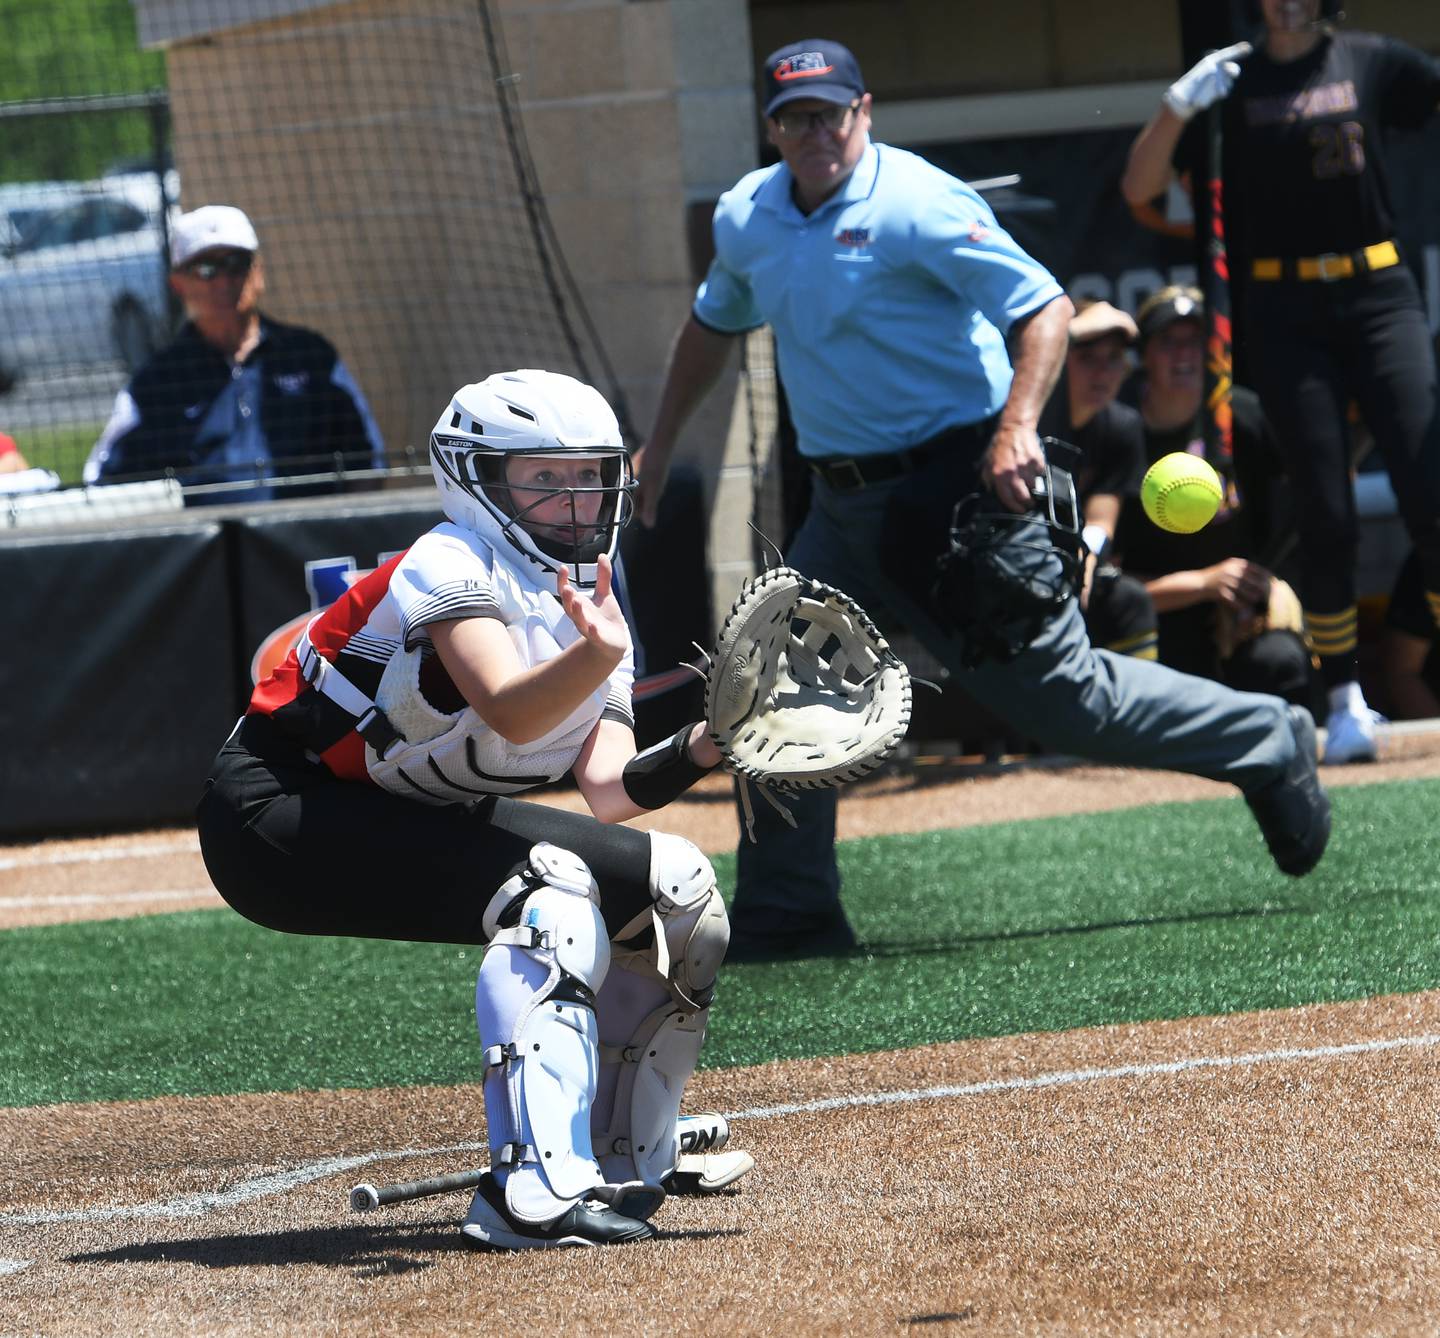 Forreston's Hailey Greenfield waits for a throw to the plate during semifinal action at the 1A softball finals in Peoria on Friday, June 3. The Cardinals lost the game 4-0 and will place Newark for third place on Saturday, June 4.